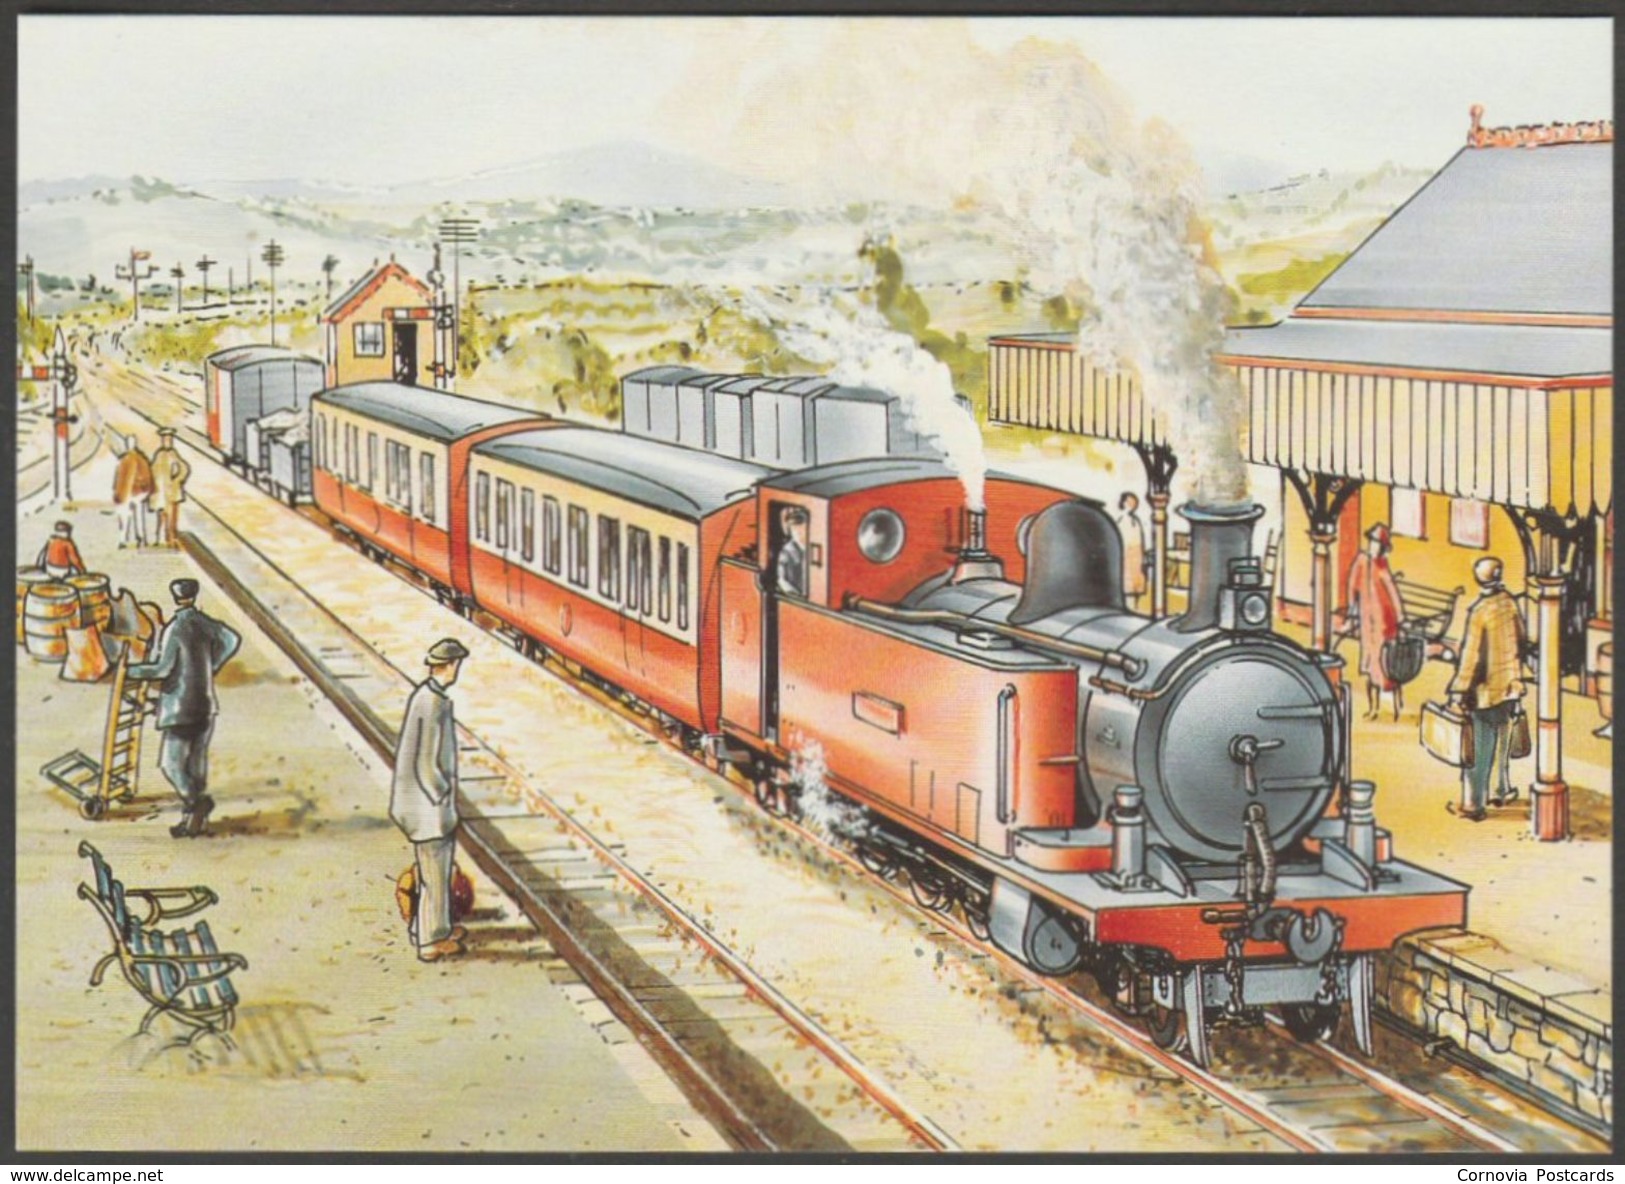 County Donegal Railway By Charles Rycraft, 32p Stamp, 1995 - An Post Postcard - Trains